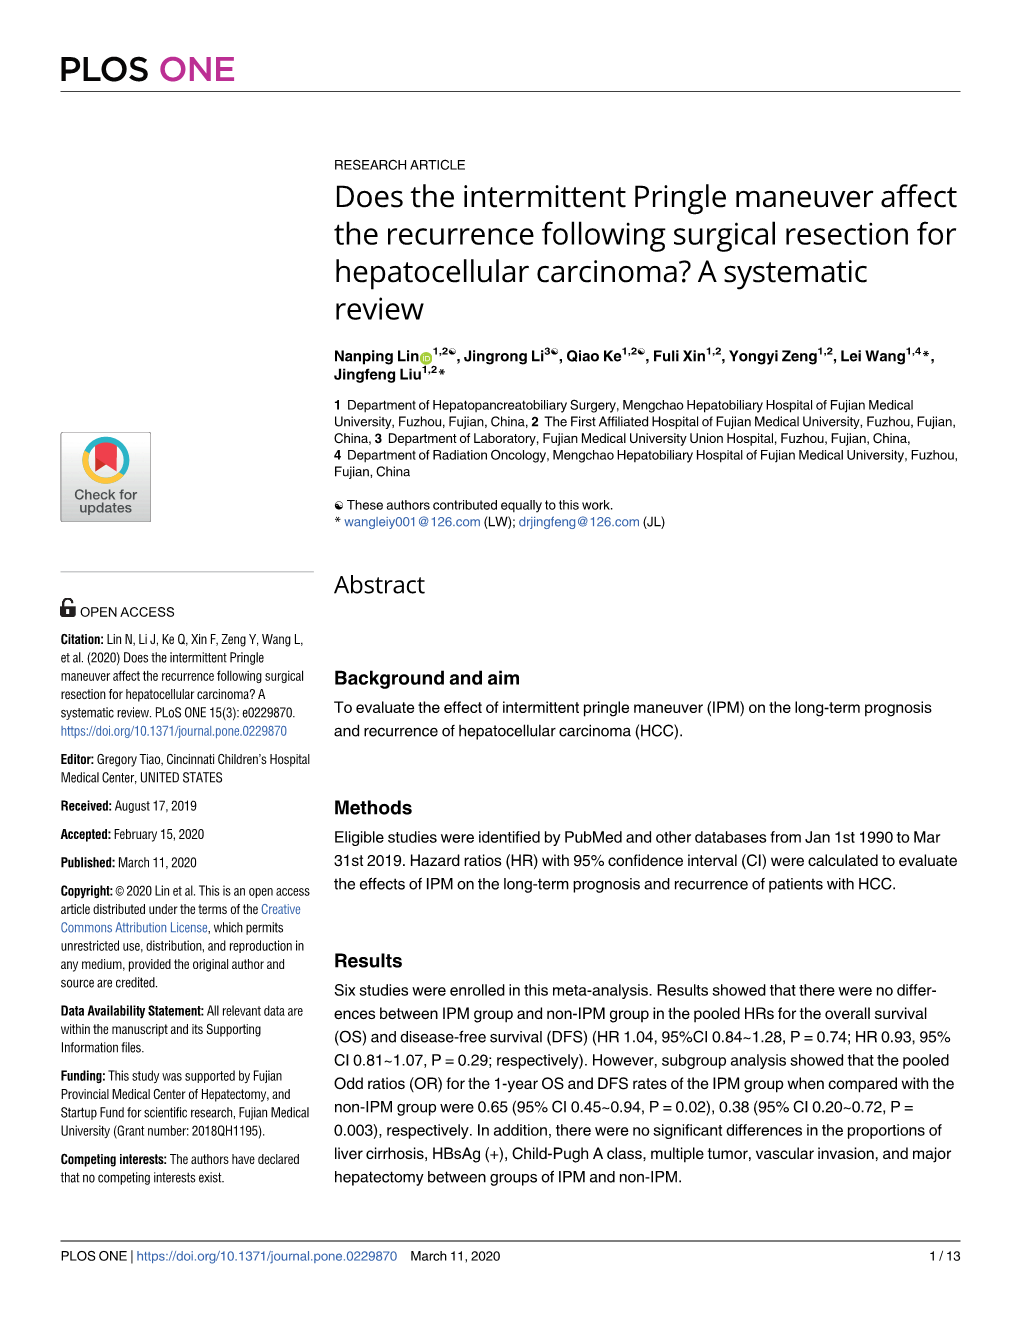 Does the Intermittent Pringle Maneuver Affect the Recurrence Following Surgical Resection for Hepatocellular Carcinoma? a Systematic Review